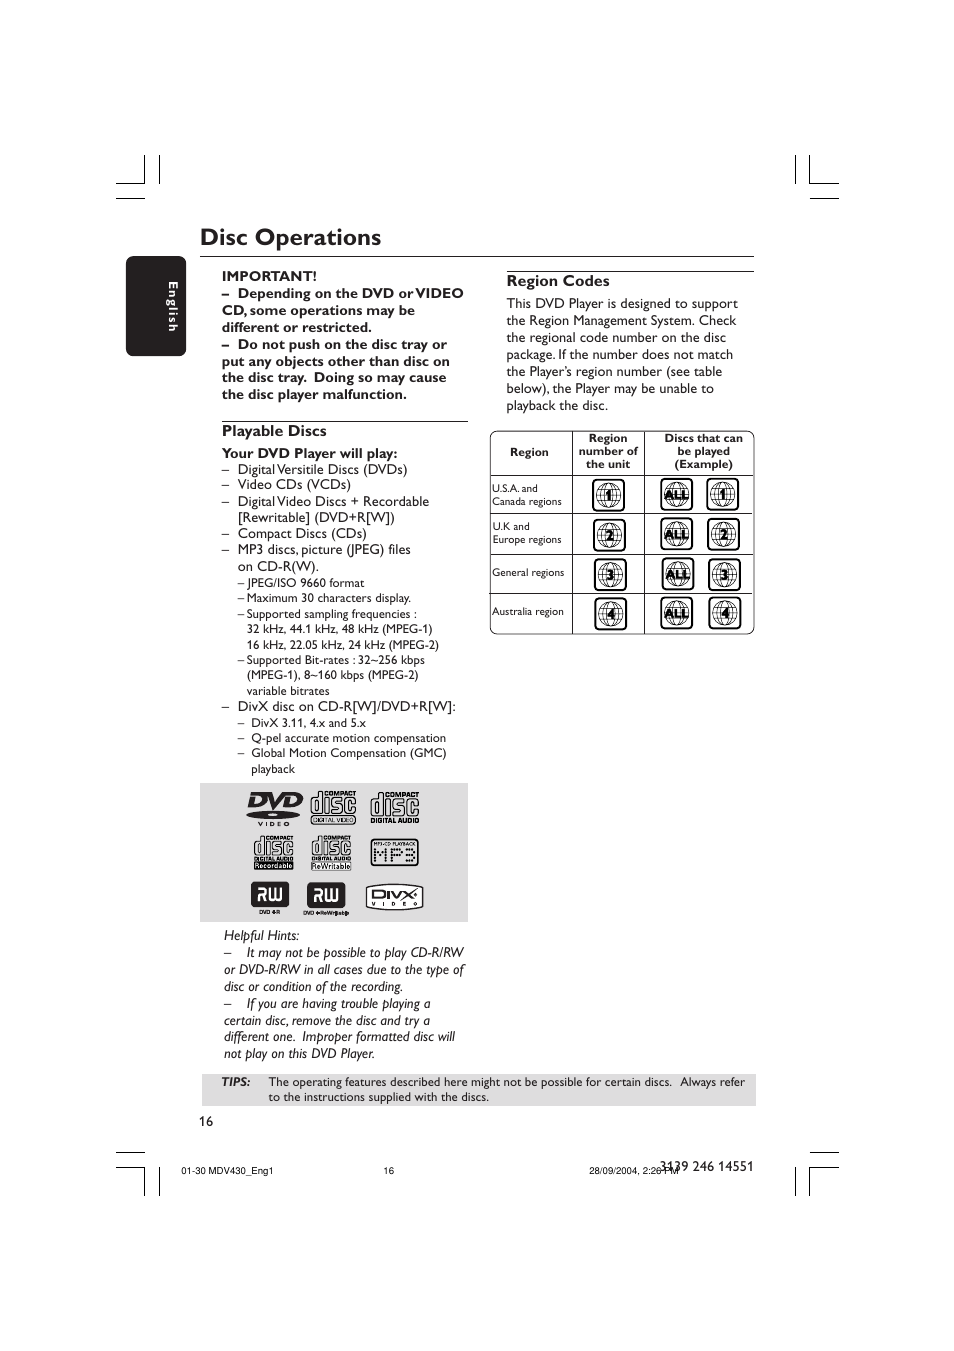 Disc operations | Philips Magnavox MDV430 User Manual | Page 16 / 30